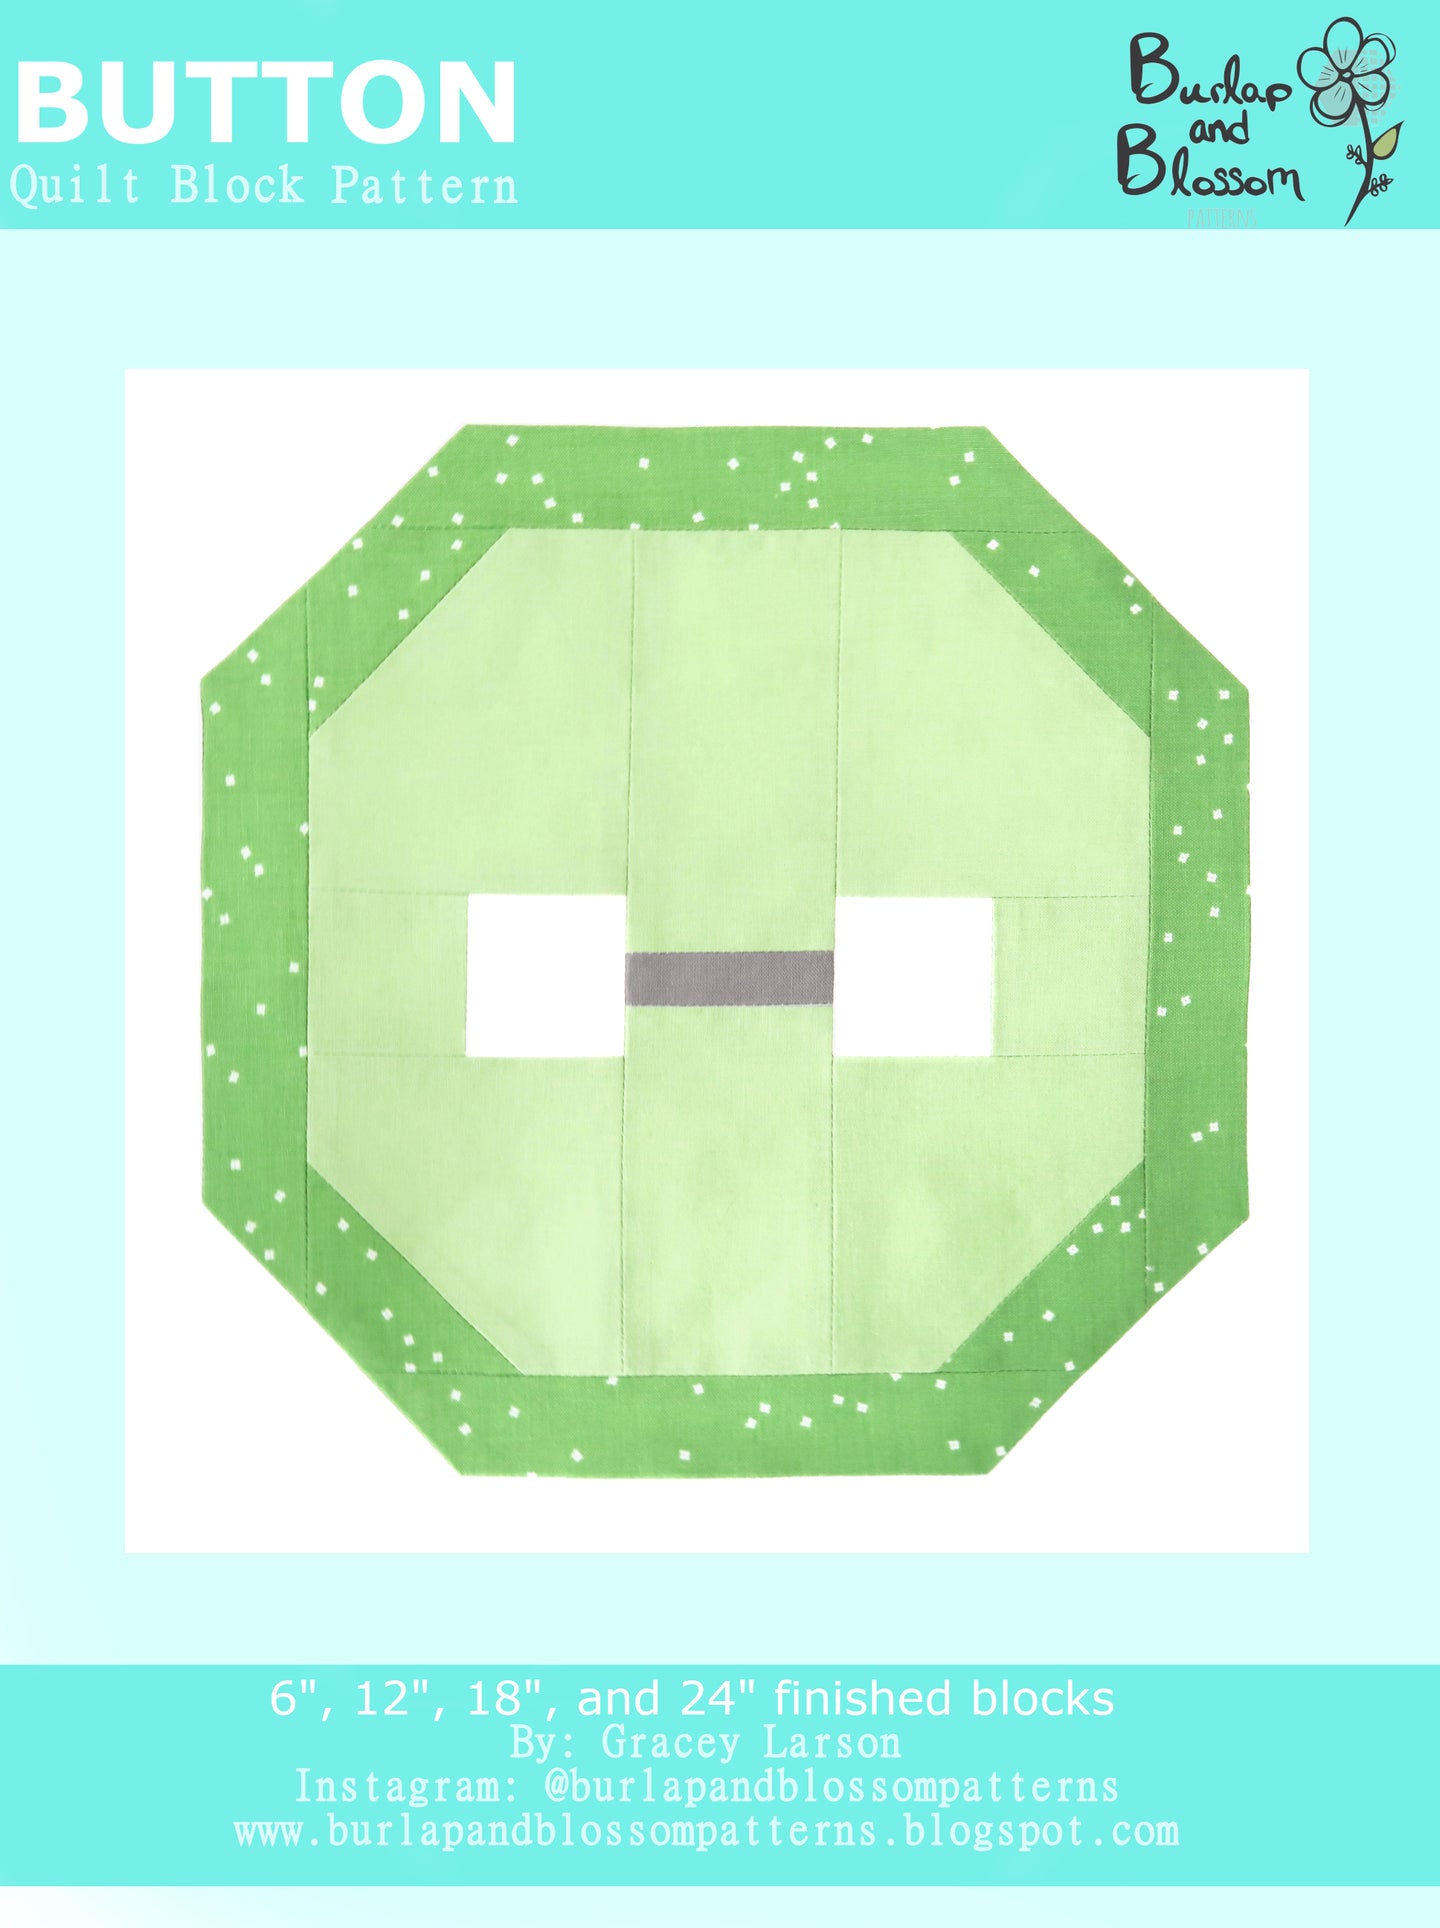 Pattern, Button Quilt Block by Burlap and Blossom (digital download)